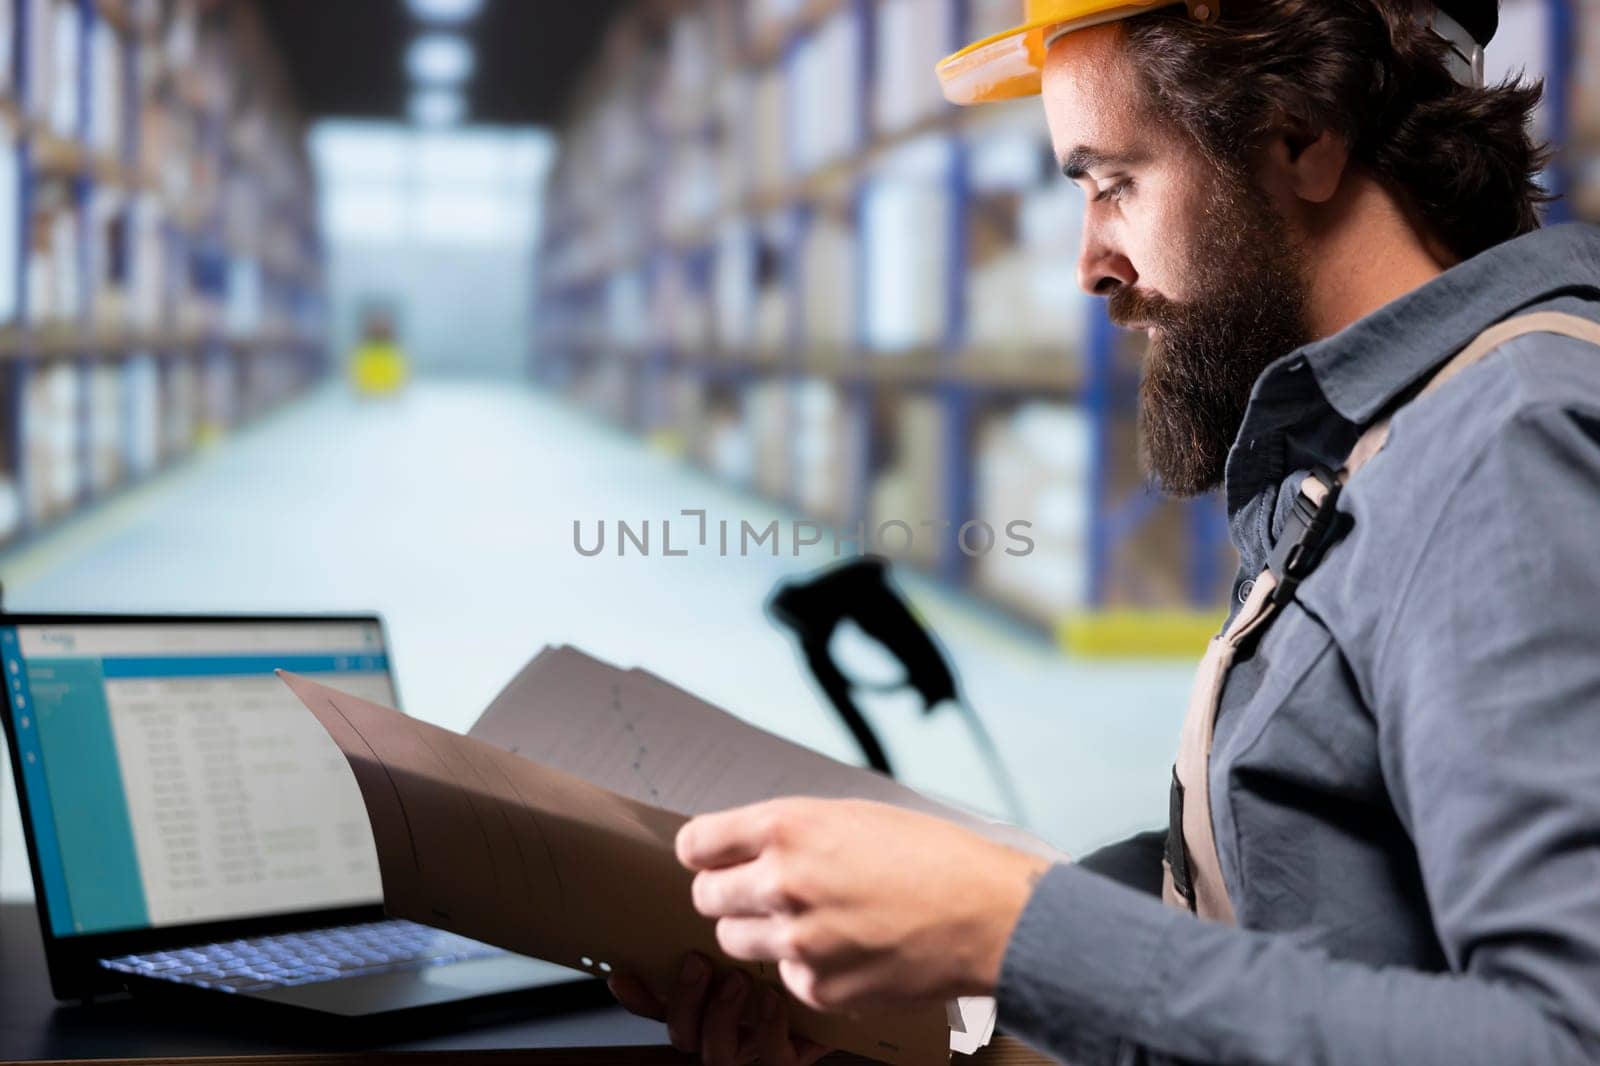 Industrial worker reading shipment invoice details in warehouse, supervising dispatch notes and order receipts in folder. Facility engineer working on supply chain management and quality control.